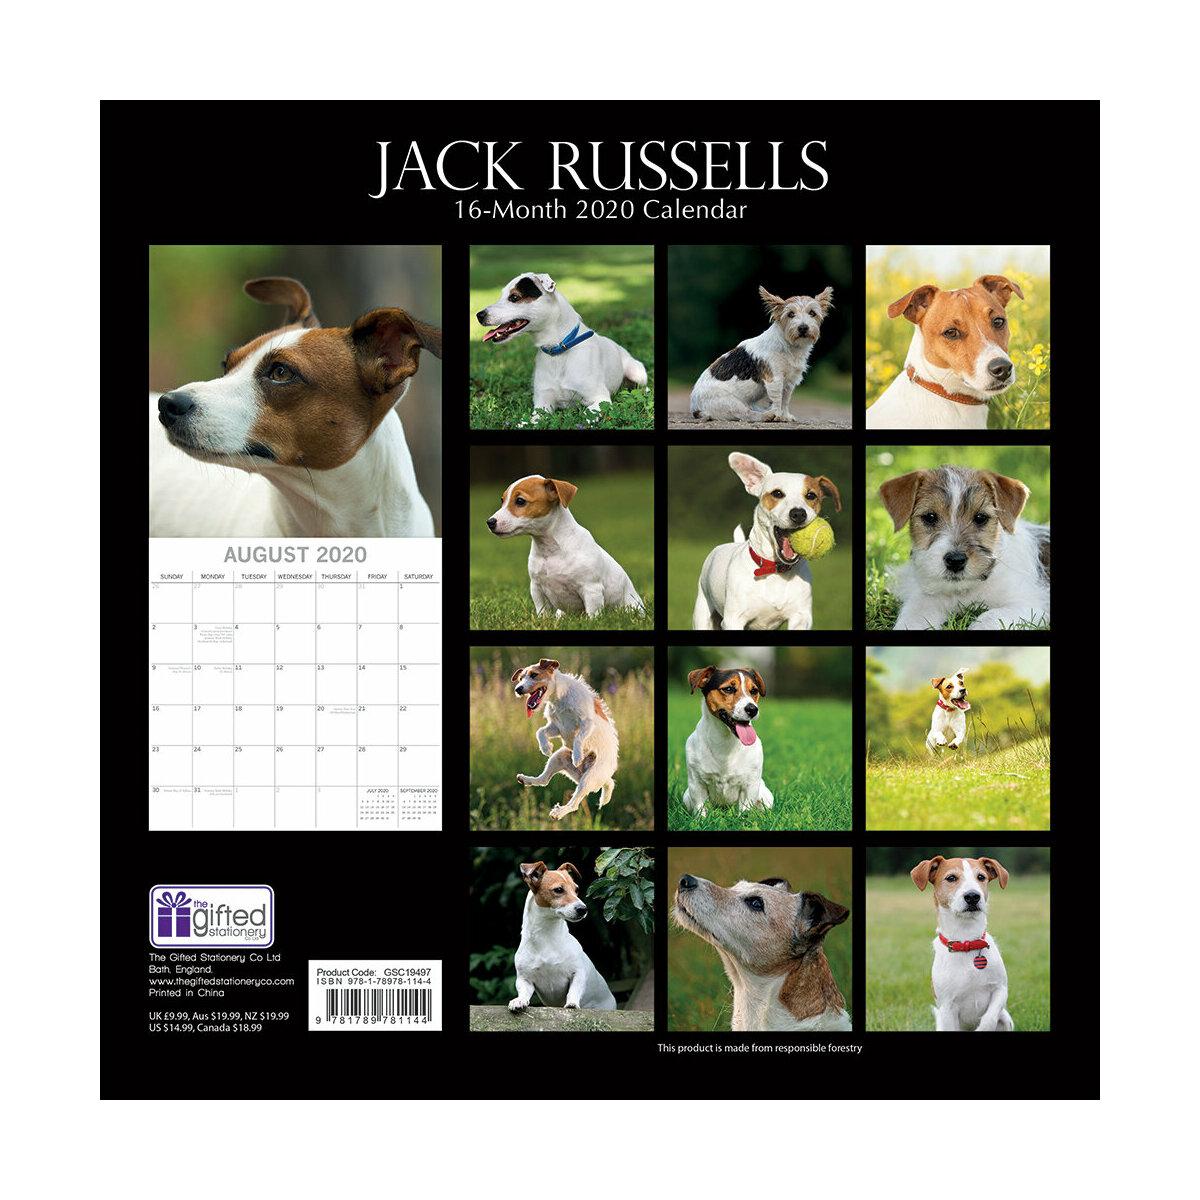 calendrier Jack russell 2020